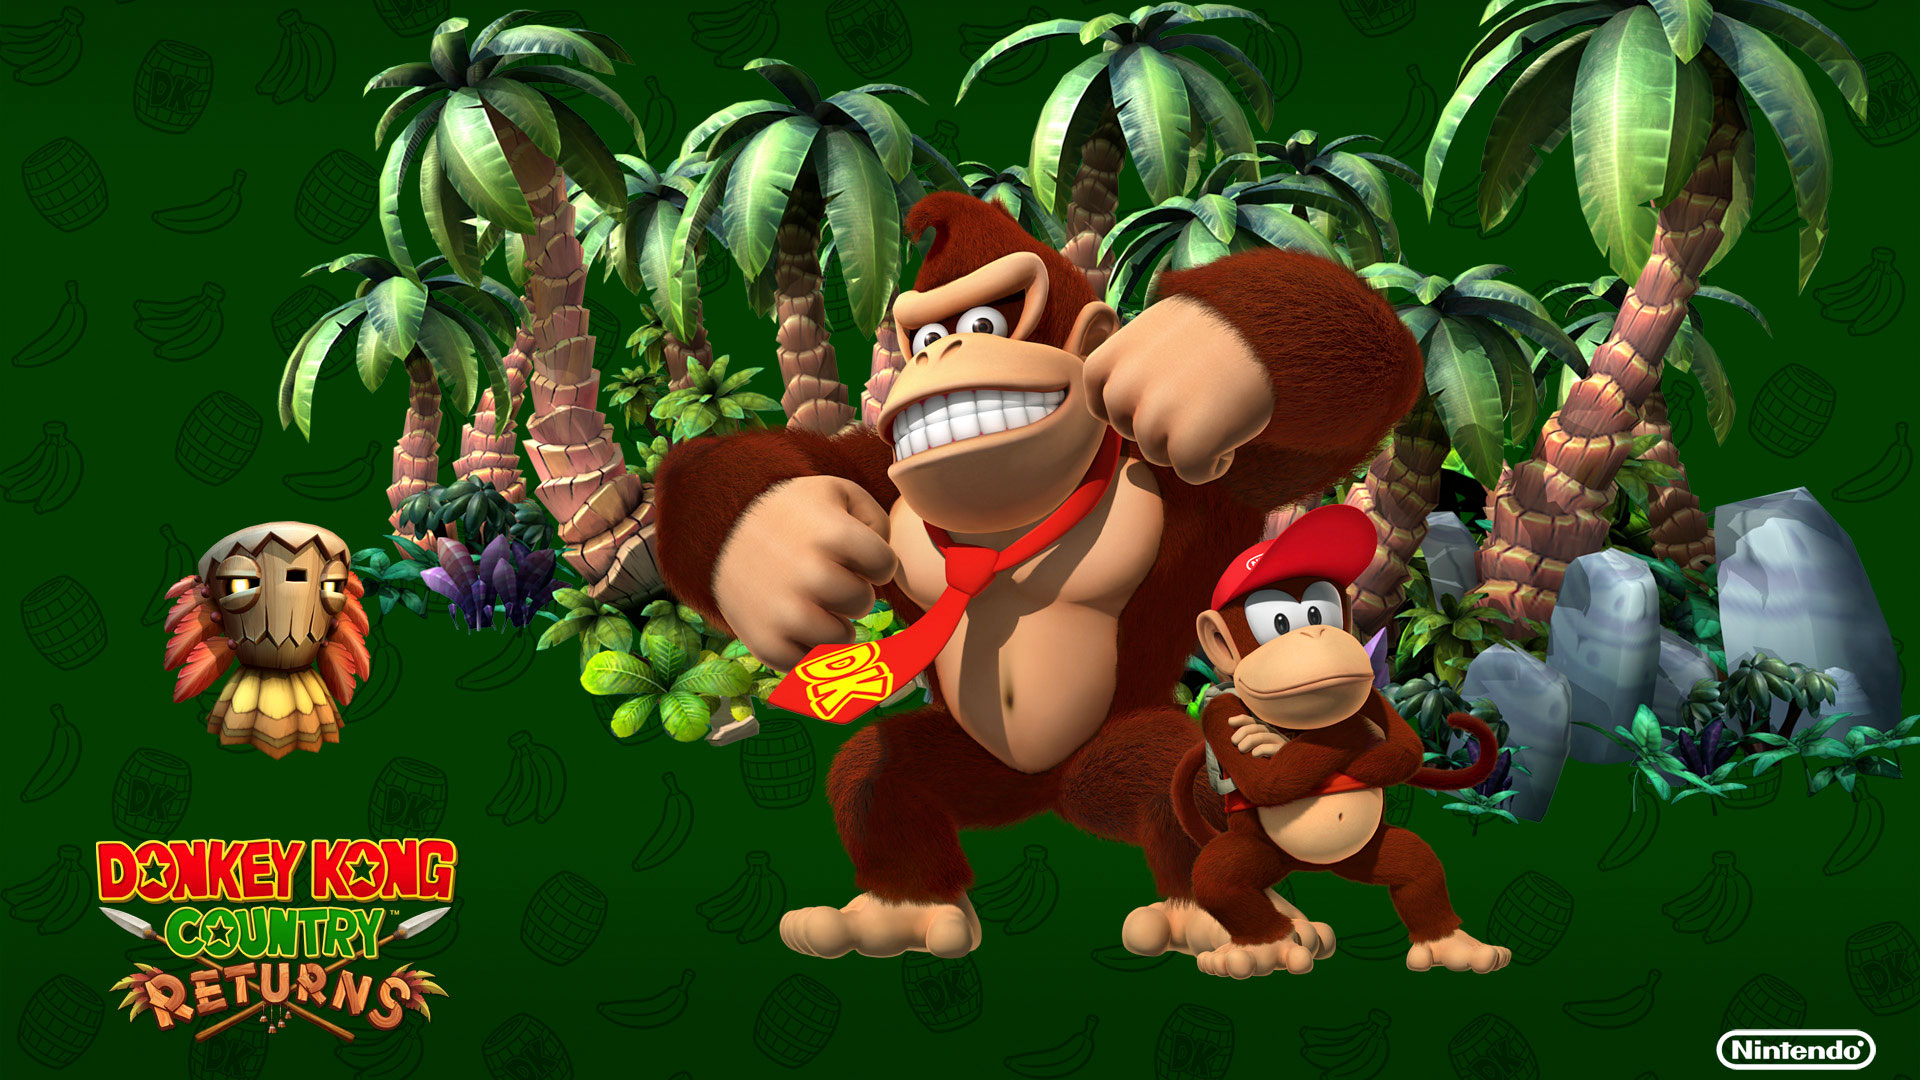 Donkey Kong Country Returns Wallpaper In HD